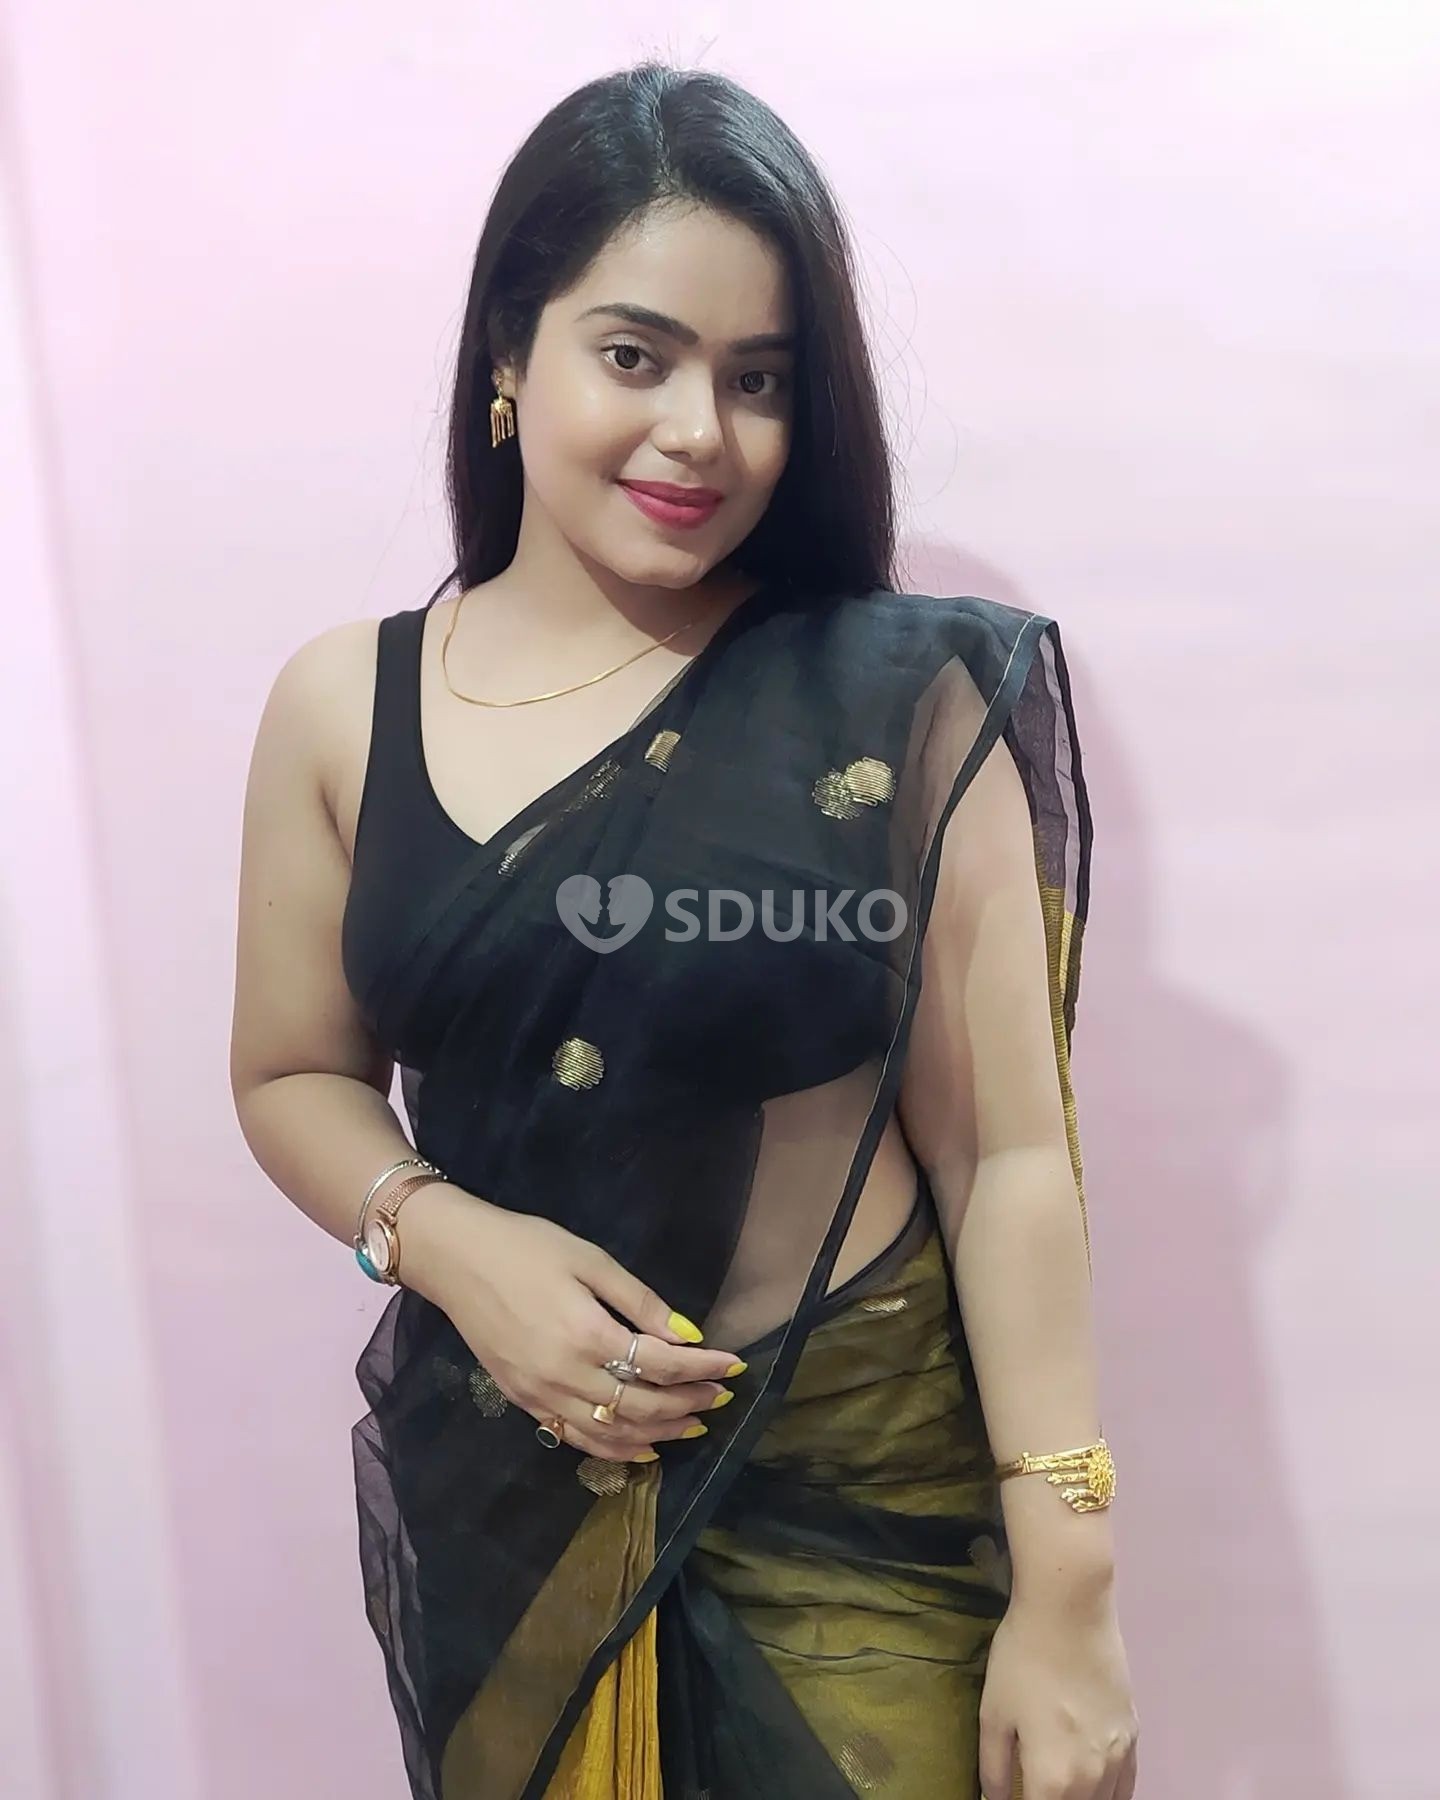 AMEERPET 💯% SAFE AND SECURE TODAY LOW PRICE UNLIMITED ENJOY HOT COLLEGE GIRL HOUSEWIFE AUNTIES AVAI. . ... ,